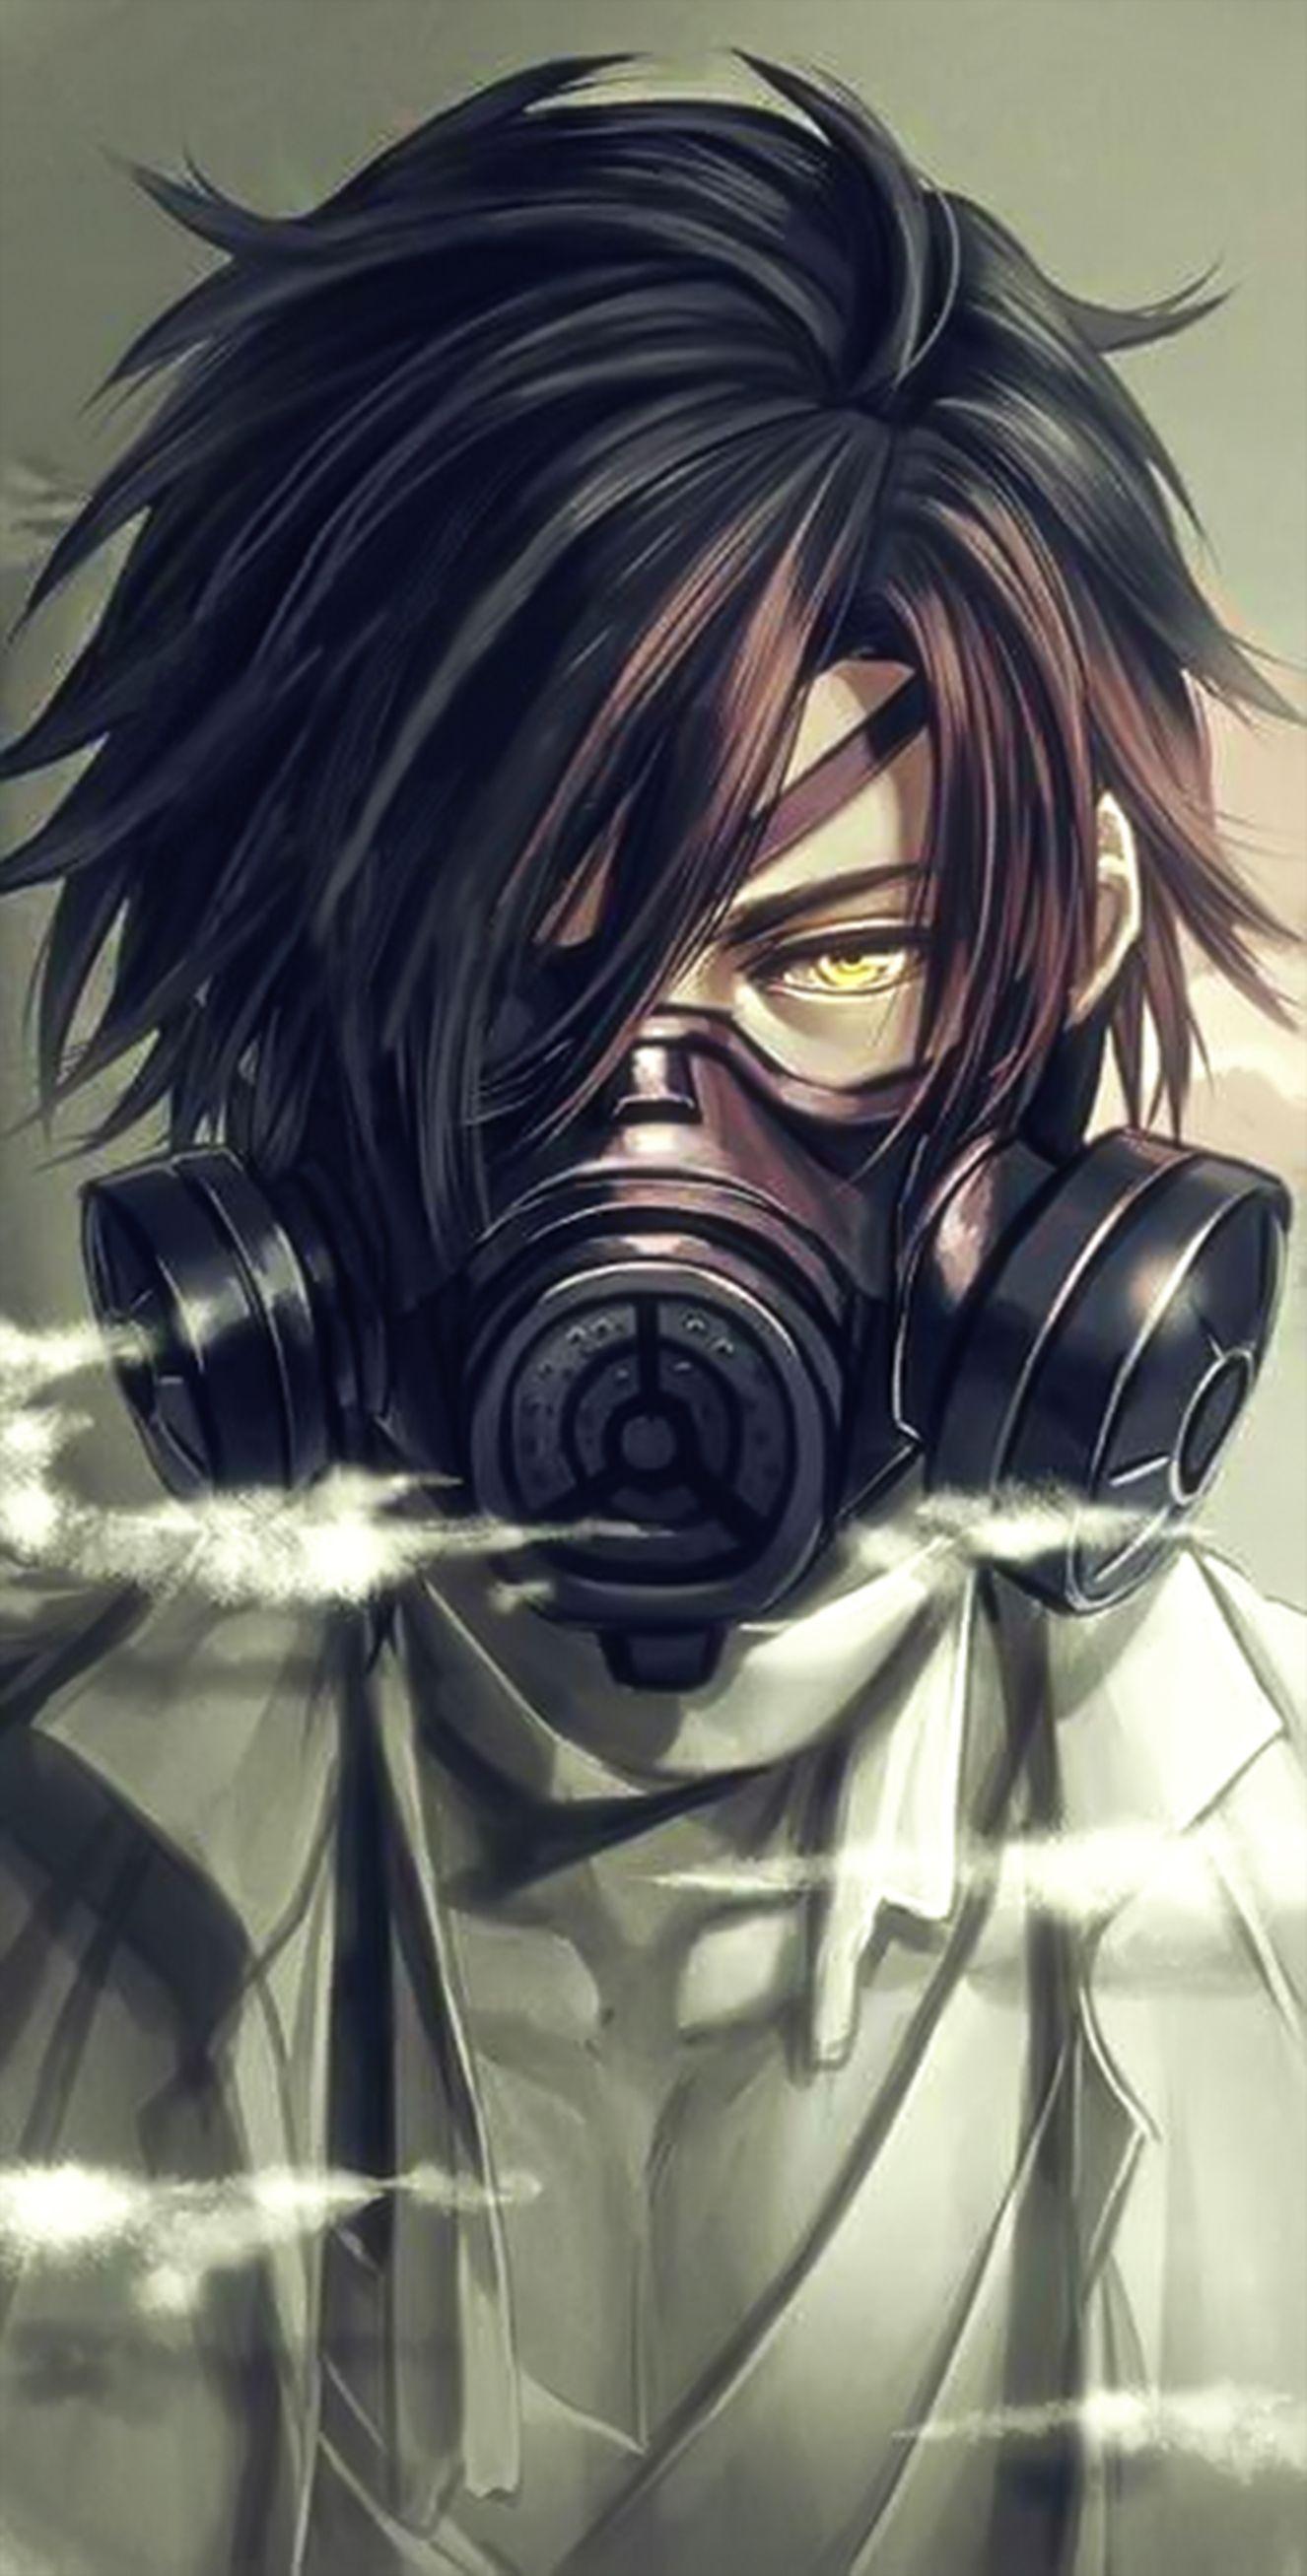 Anime Boy Mask Wallpapers - Wallpaper Cave